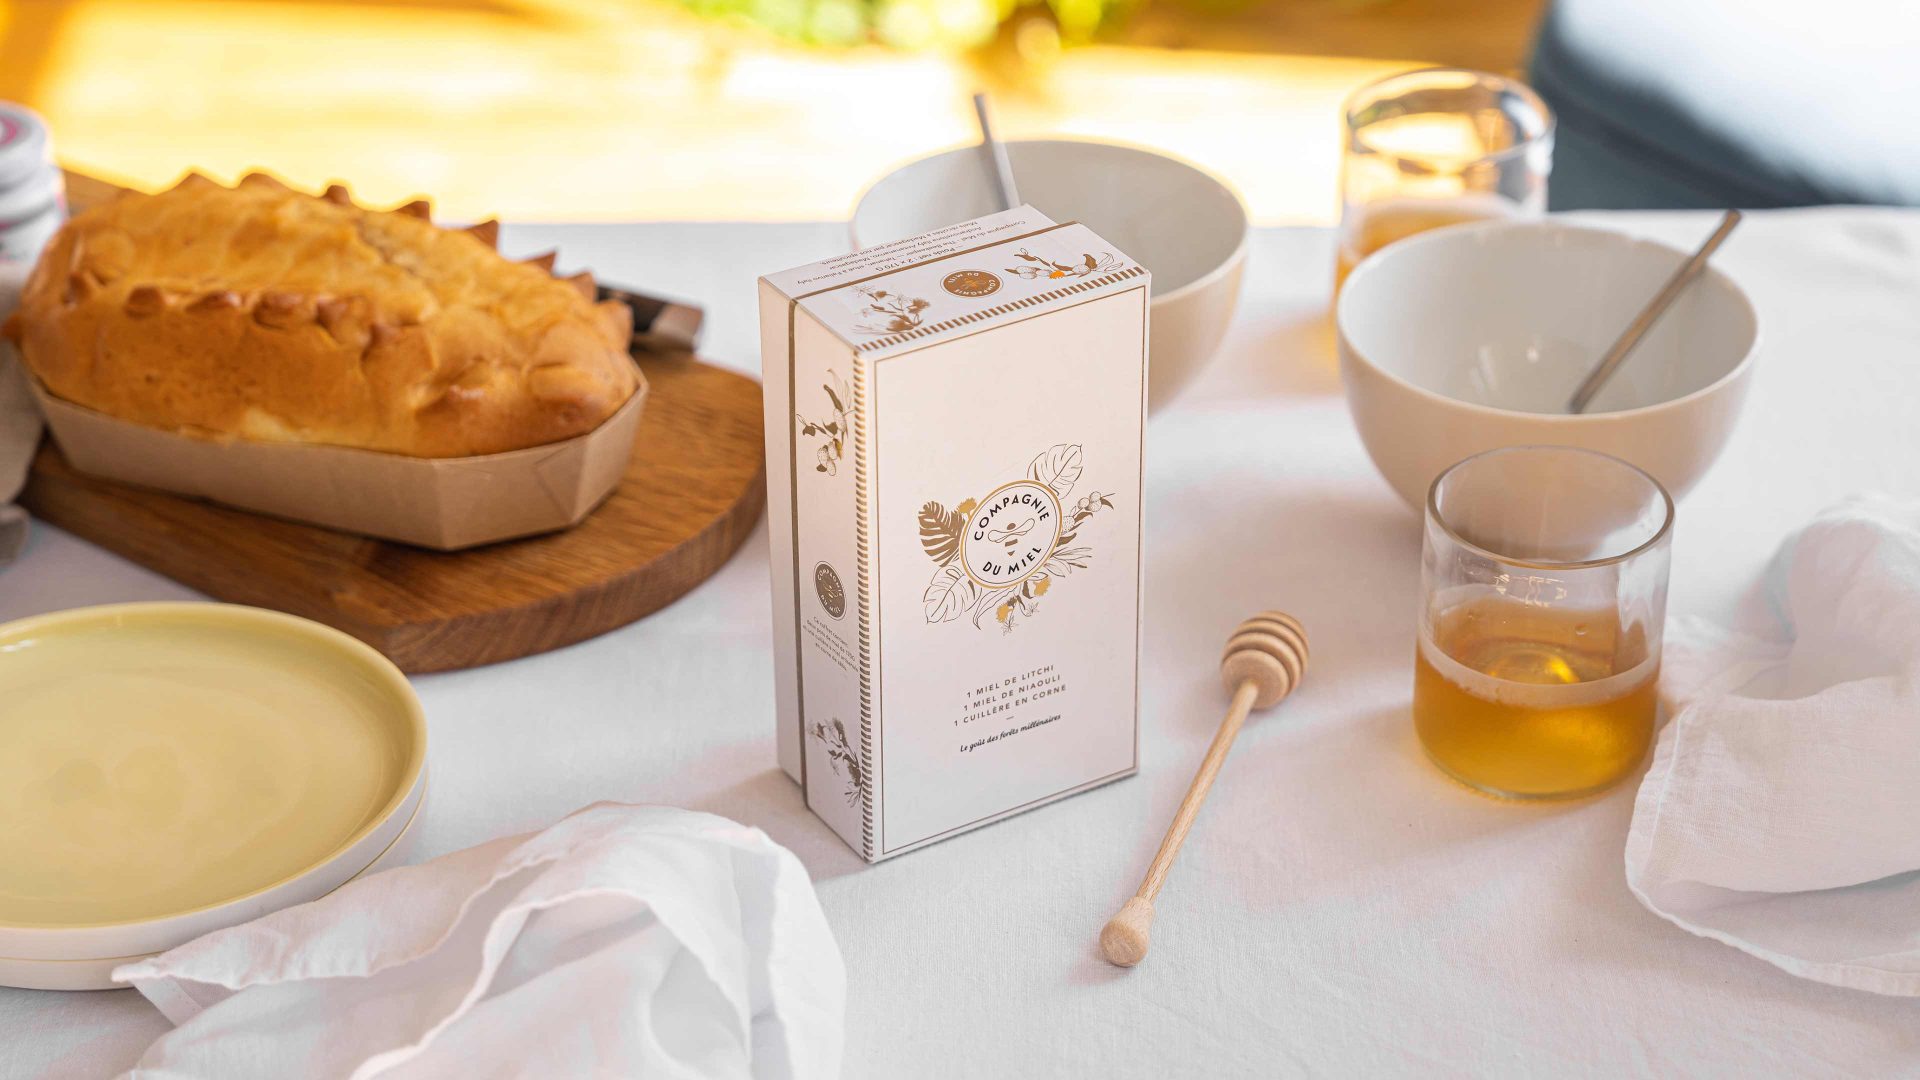 Box of honey with special spoon on the table with napkin, dishes, cake